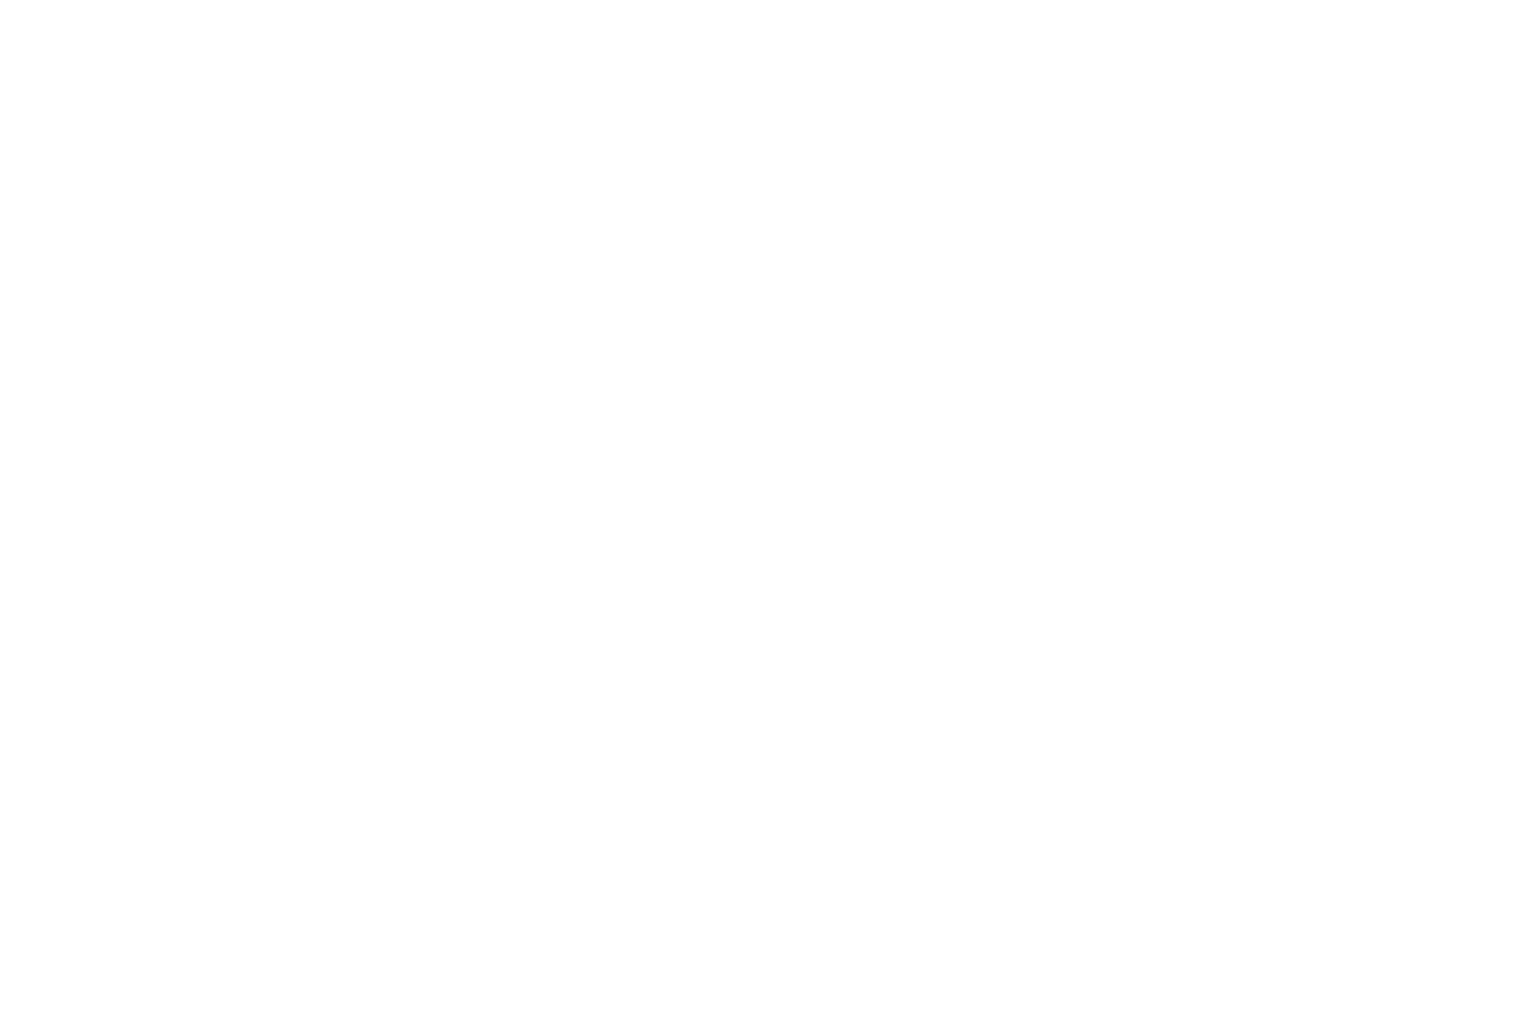 Can You See Me?